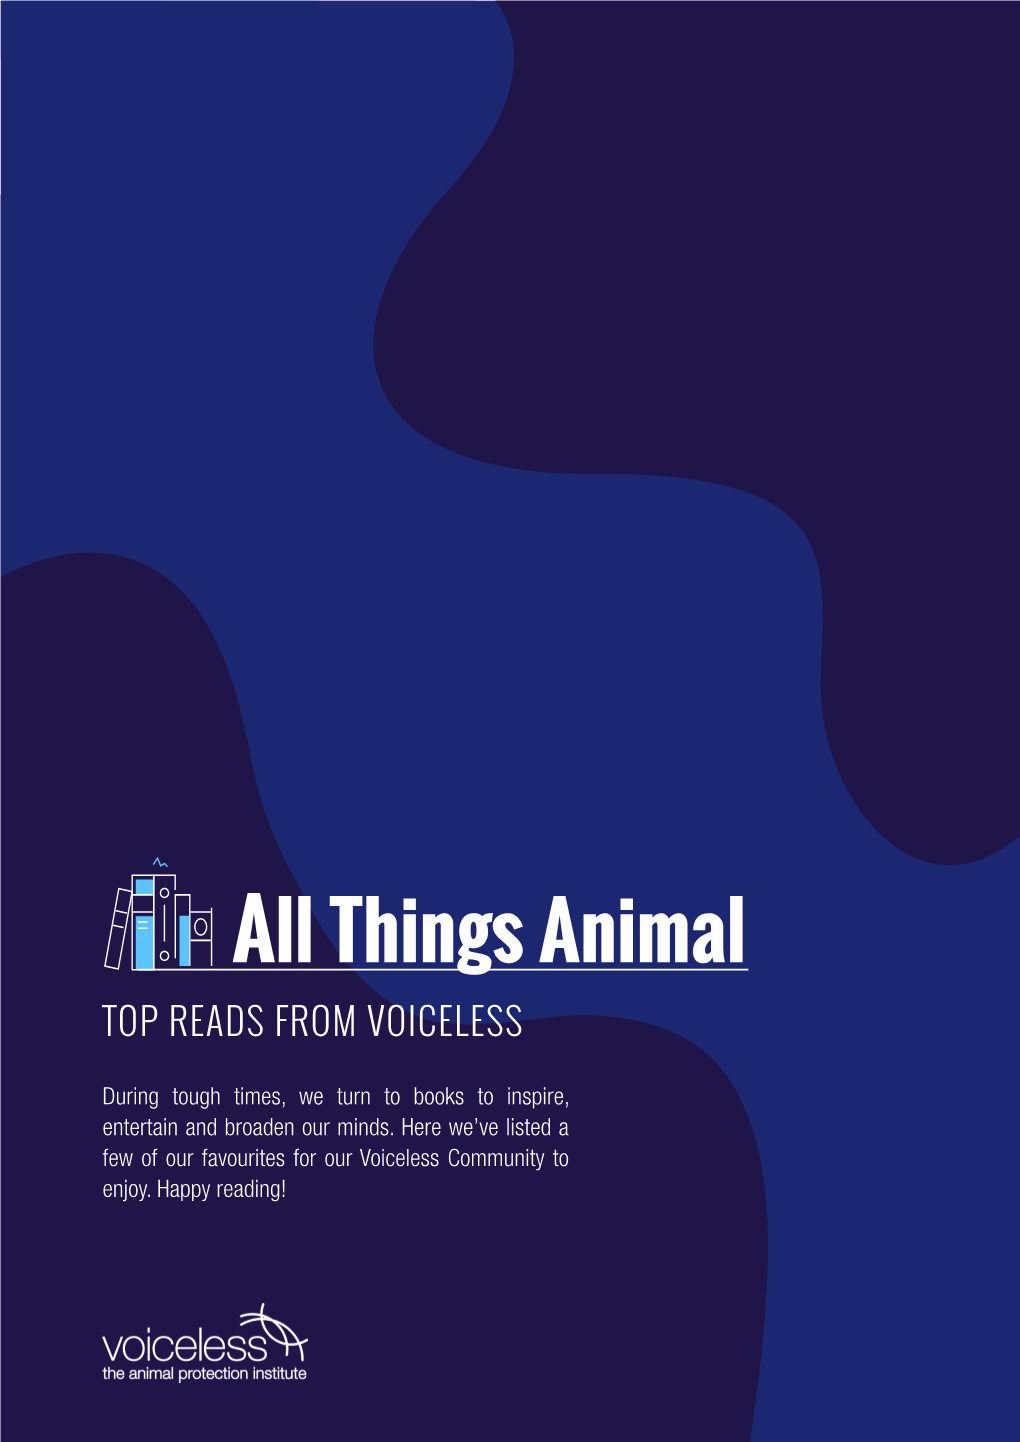 All Things Animal TOP READS from VOICELESS